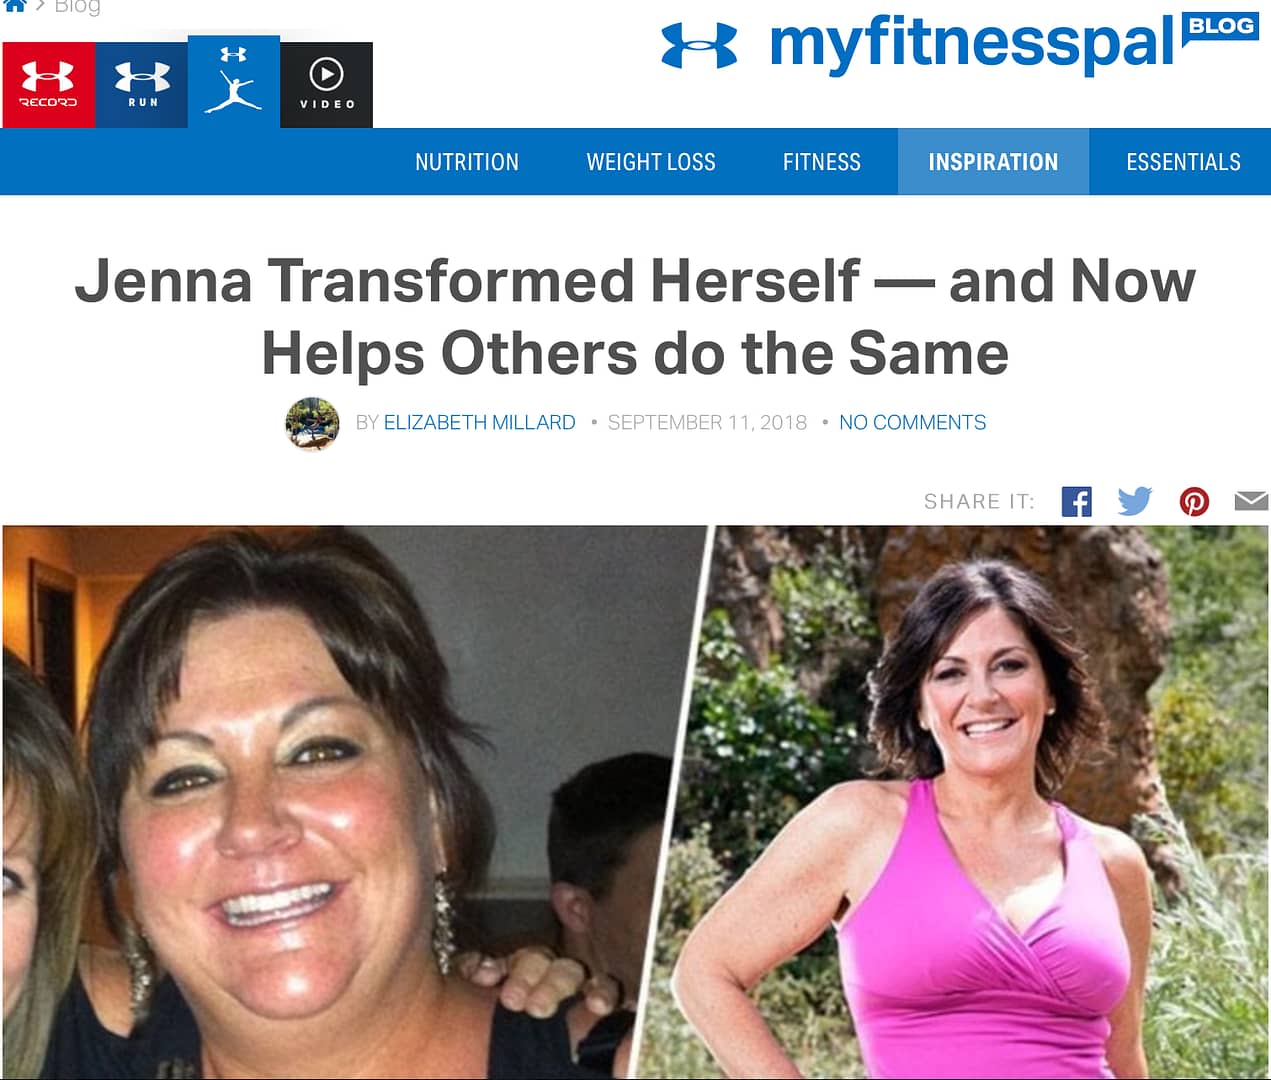 Jenna Transformed Herself — and Now Helps Others do the Same